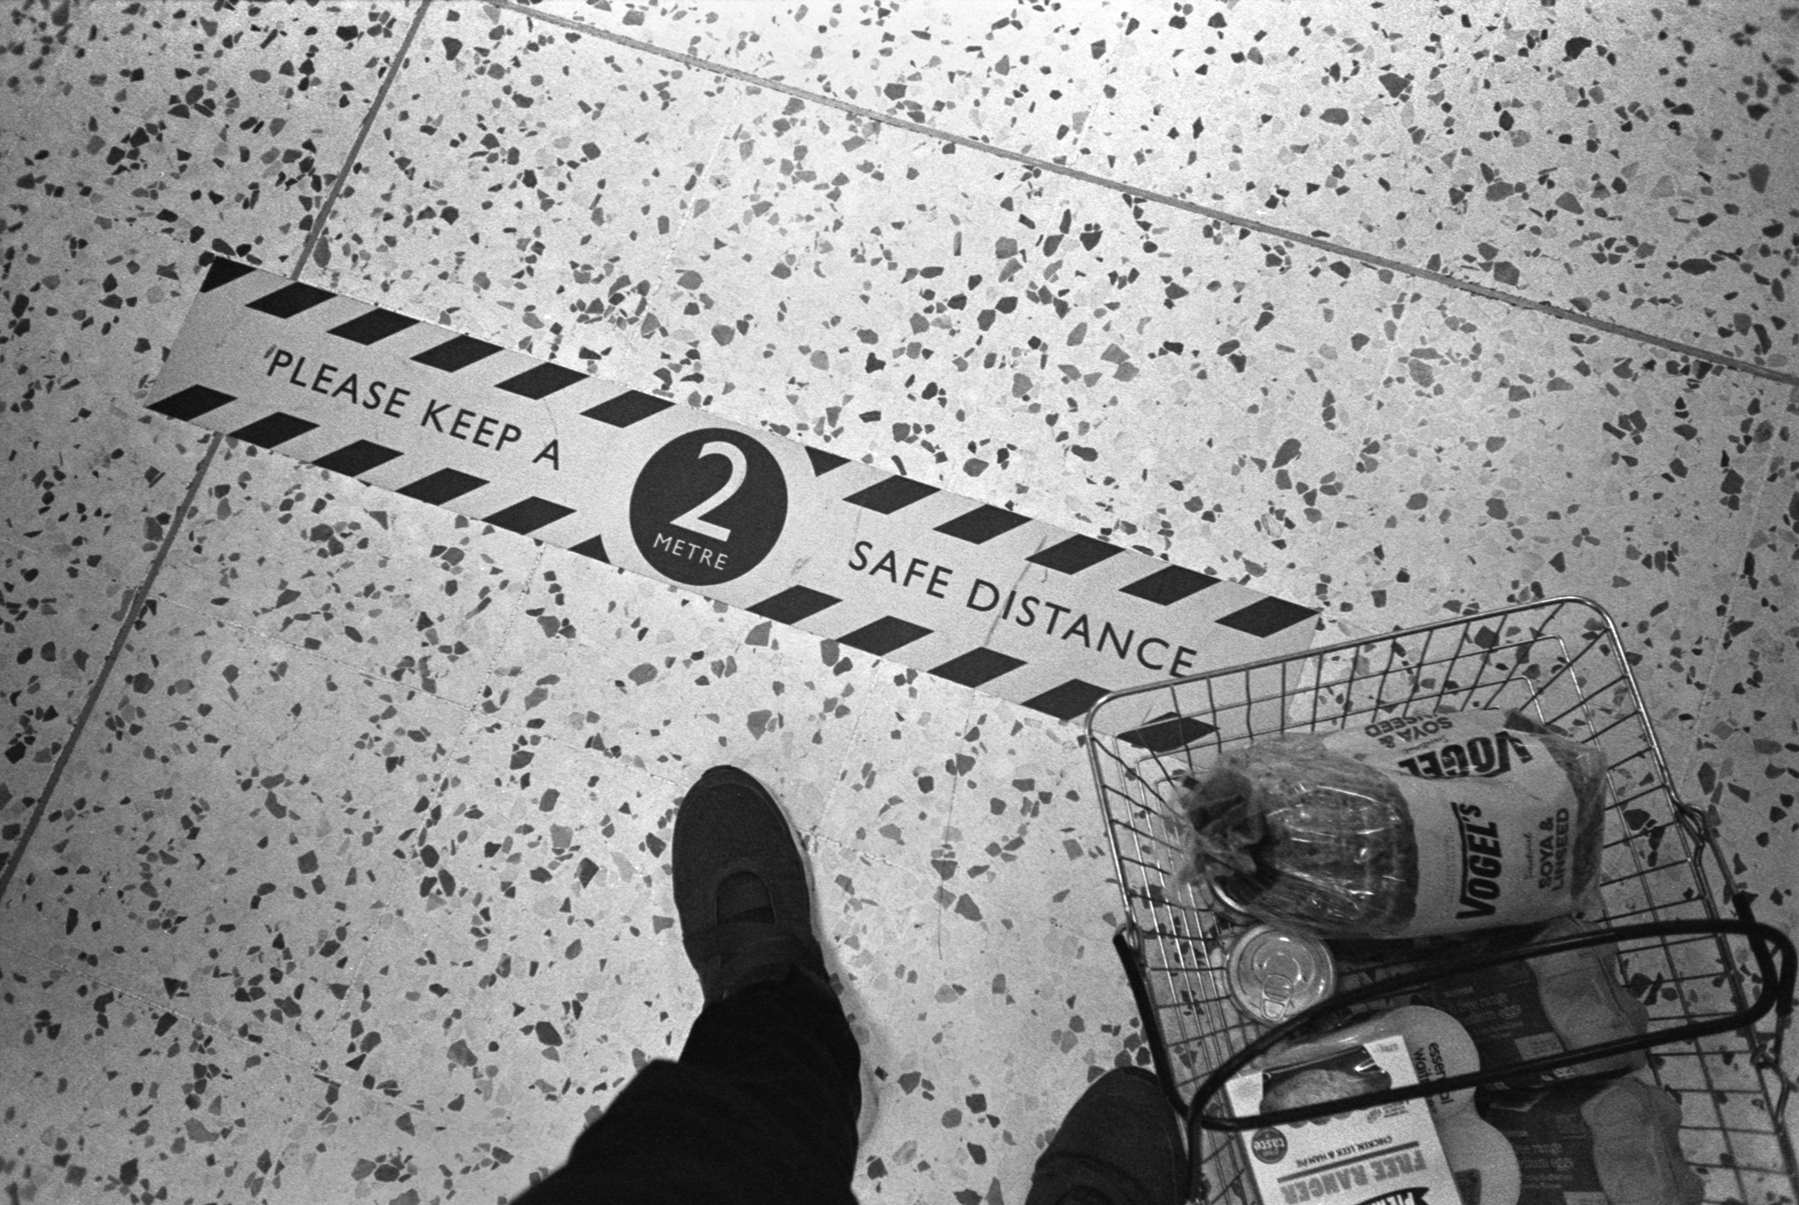 A notice on a supermarket floor to keep a 2 meter distance